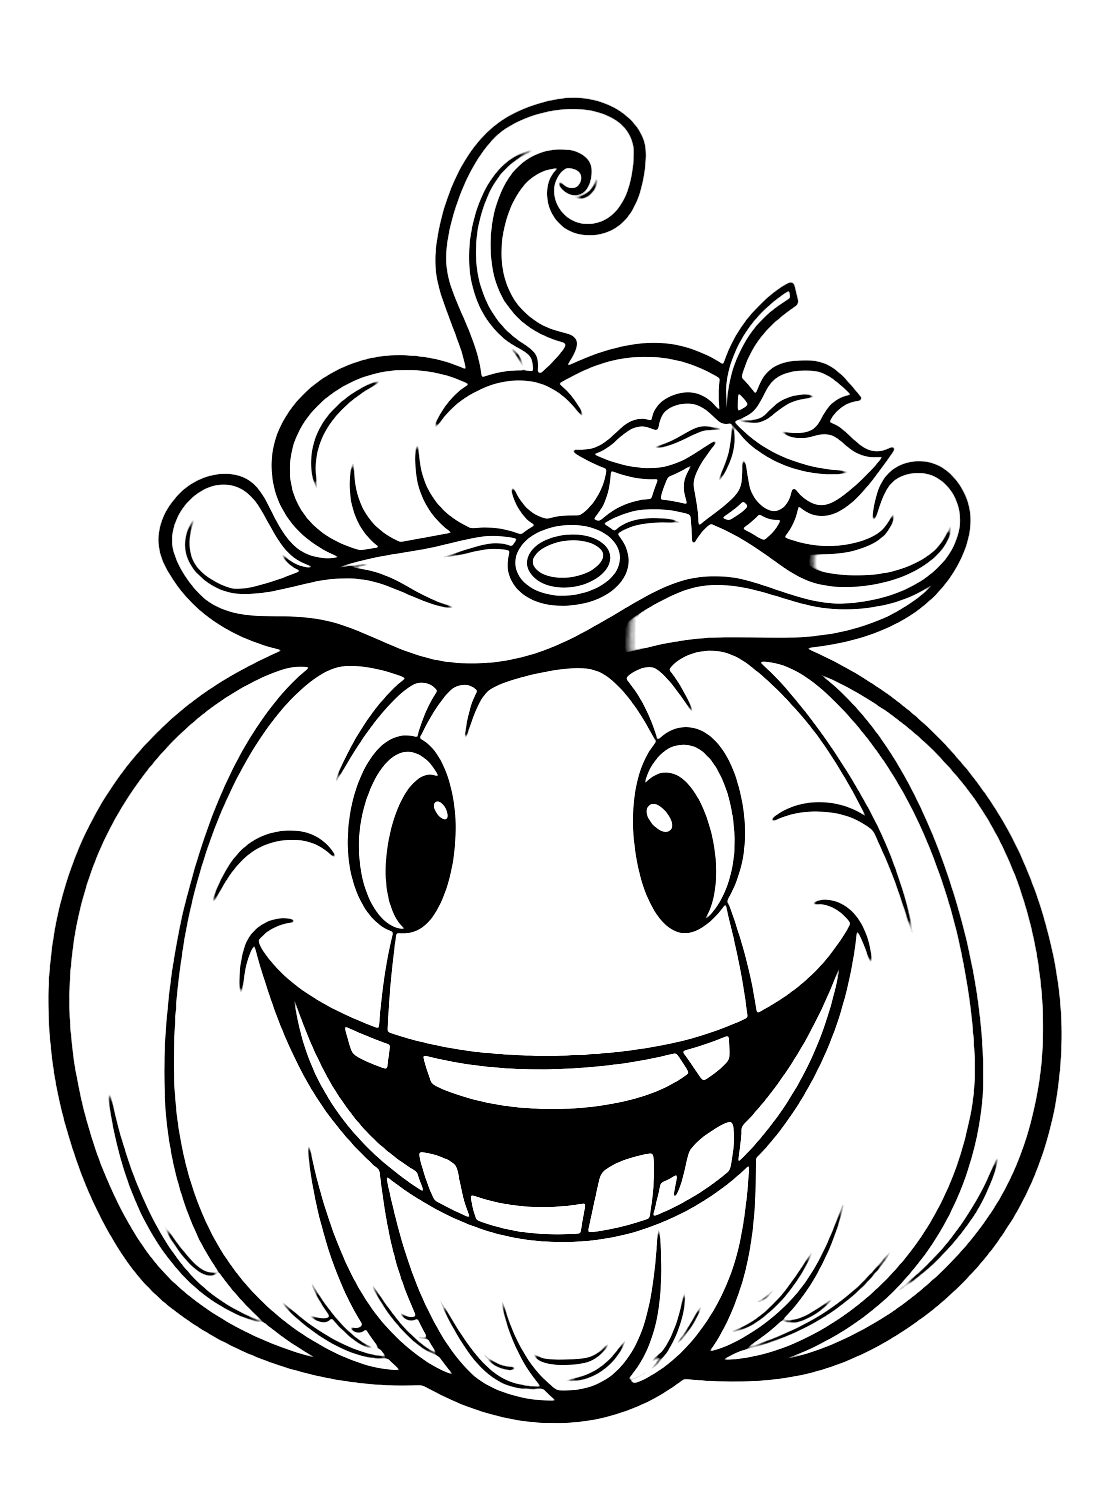 Free Pumpkin Coloring Pages